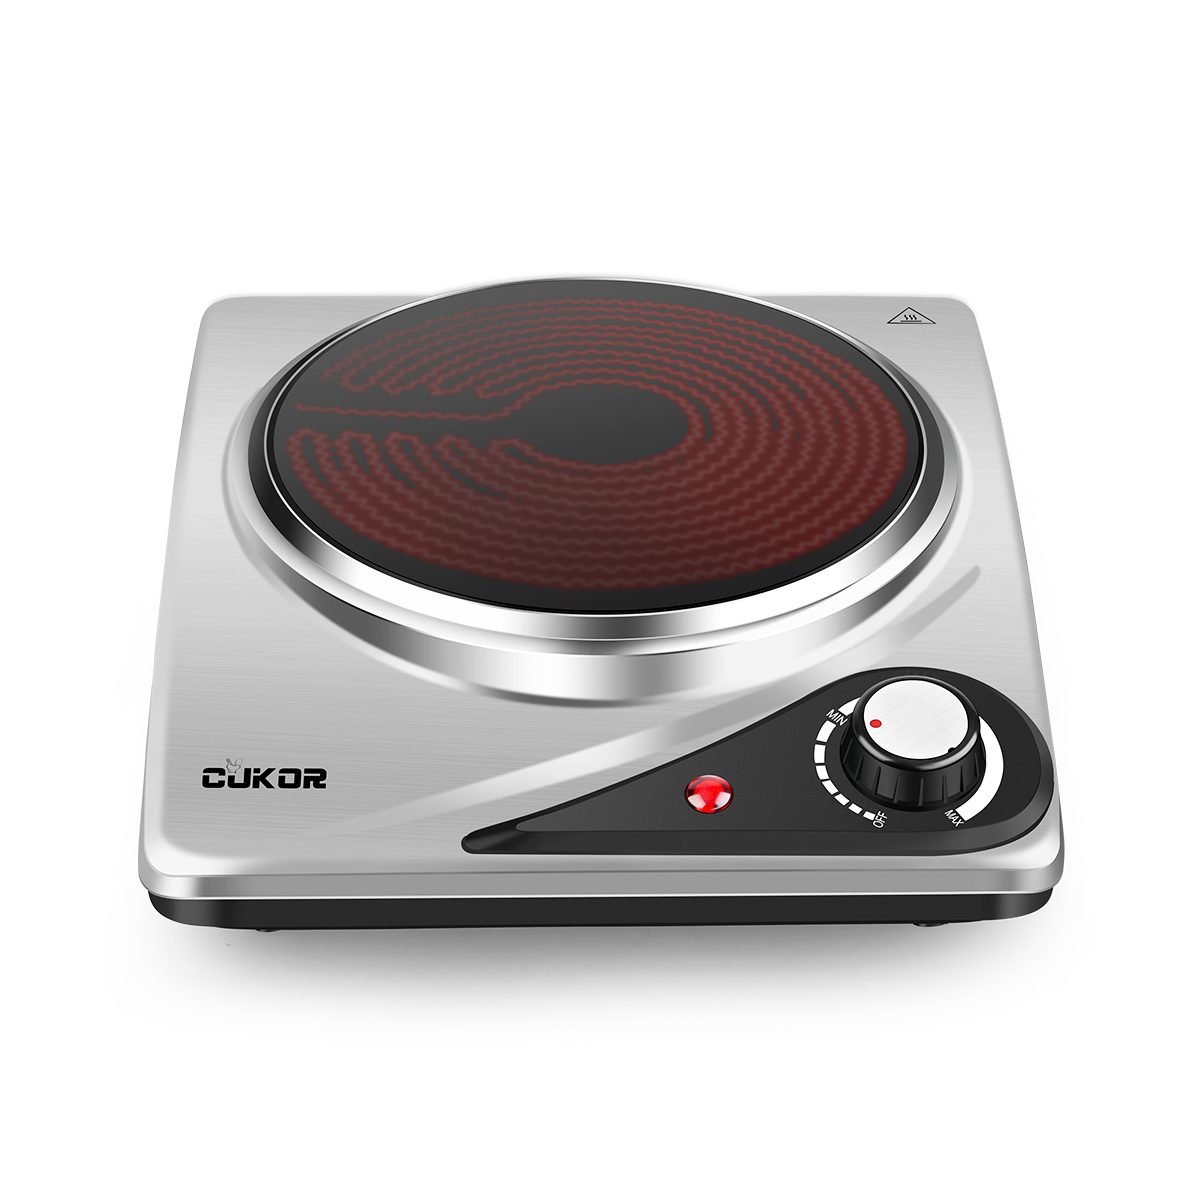 CUKOR Electric Single Hot Plate,Portable Stove,1200W Infrared Single Burner  for cooking, Heat-up In - CUKOR